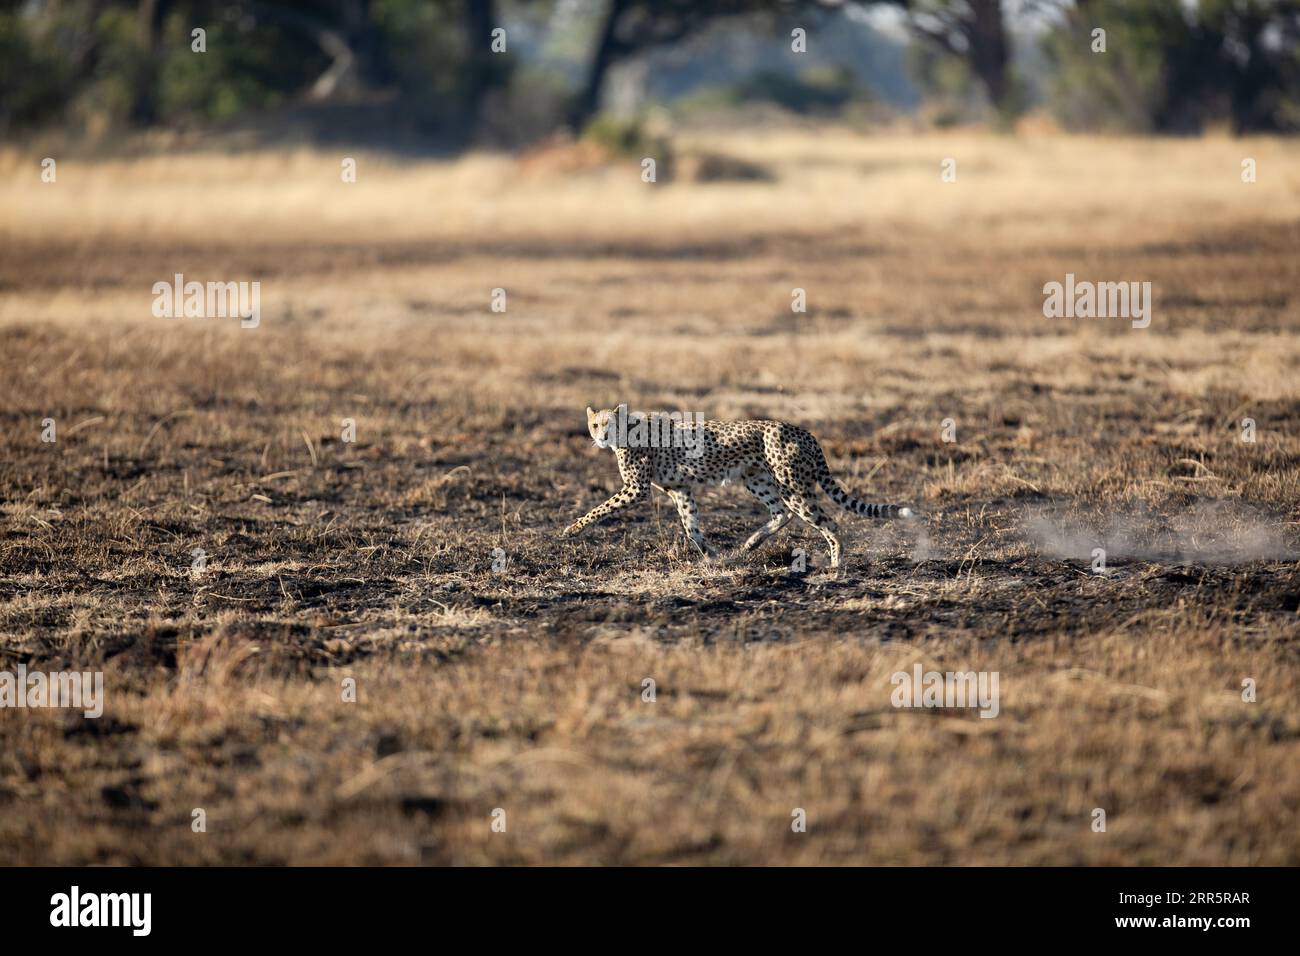 A slender and fast Cheetah makes its way across an open plain as it hunts in the wooded areas of the Okavango Delta, Botswana. Stock Photo